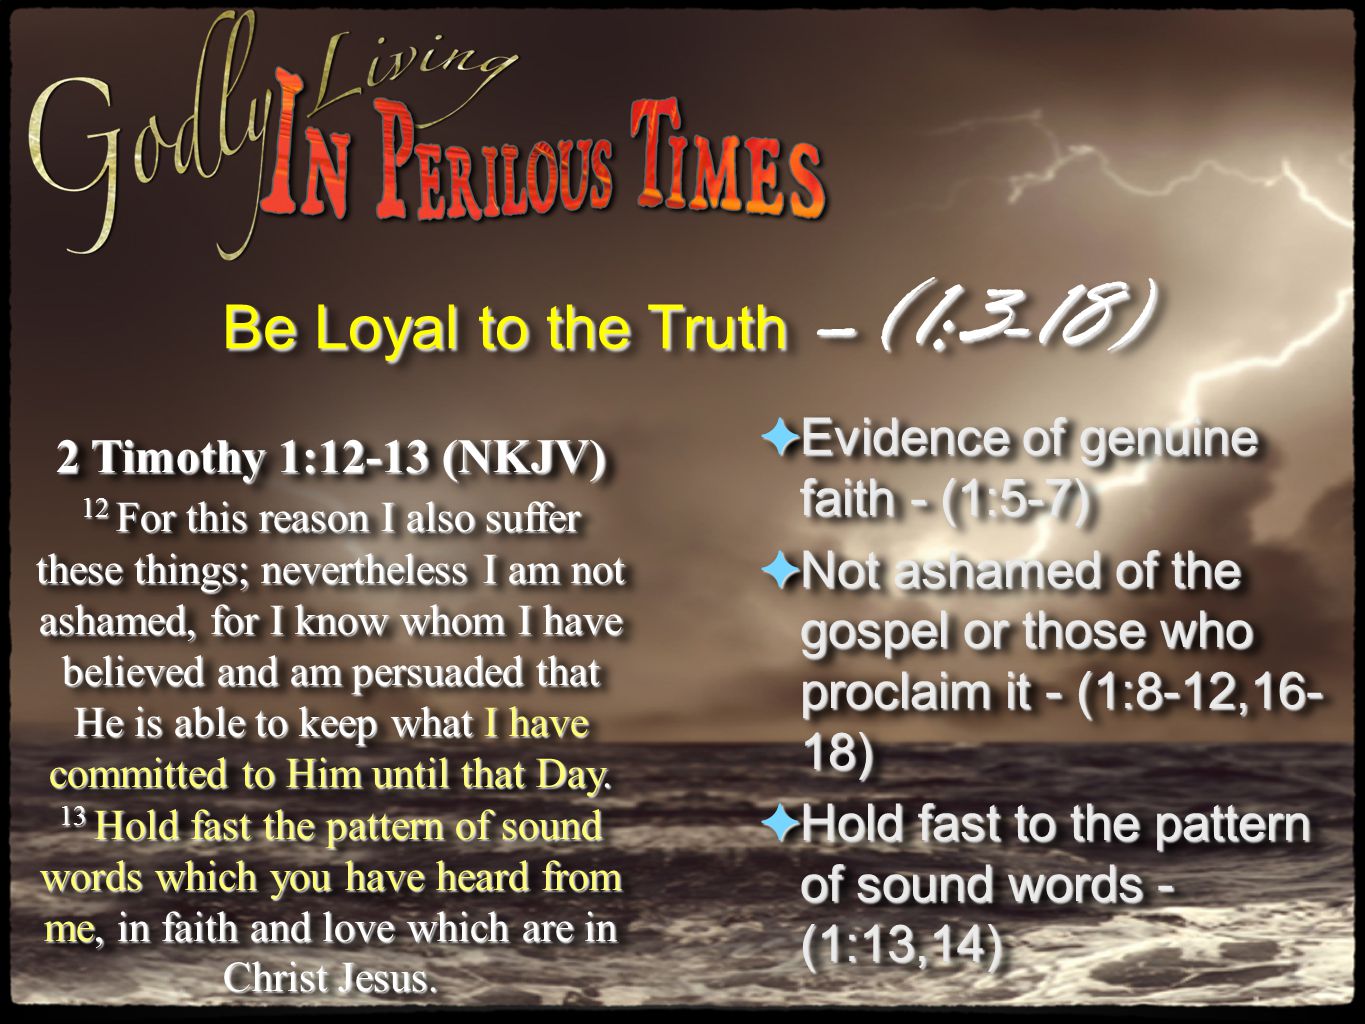 Be Loyal to the Truth –(1:3-18) 2 Timothy 1:12-13 (NKJV) 12 For this reason I also suffer these things; nevertheless I am not ashamed, for I know whom I have believed and am persuaded that He is able to keep what I have committed to Him until that Day.